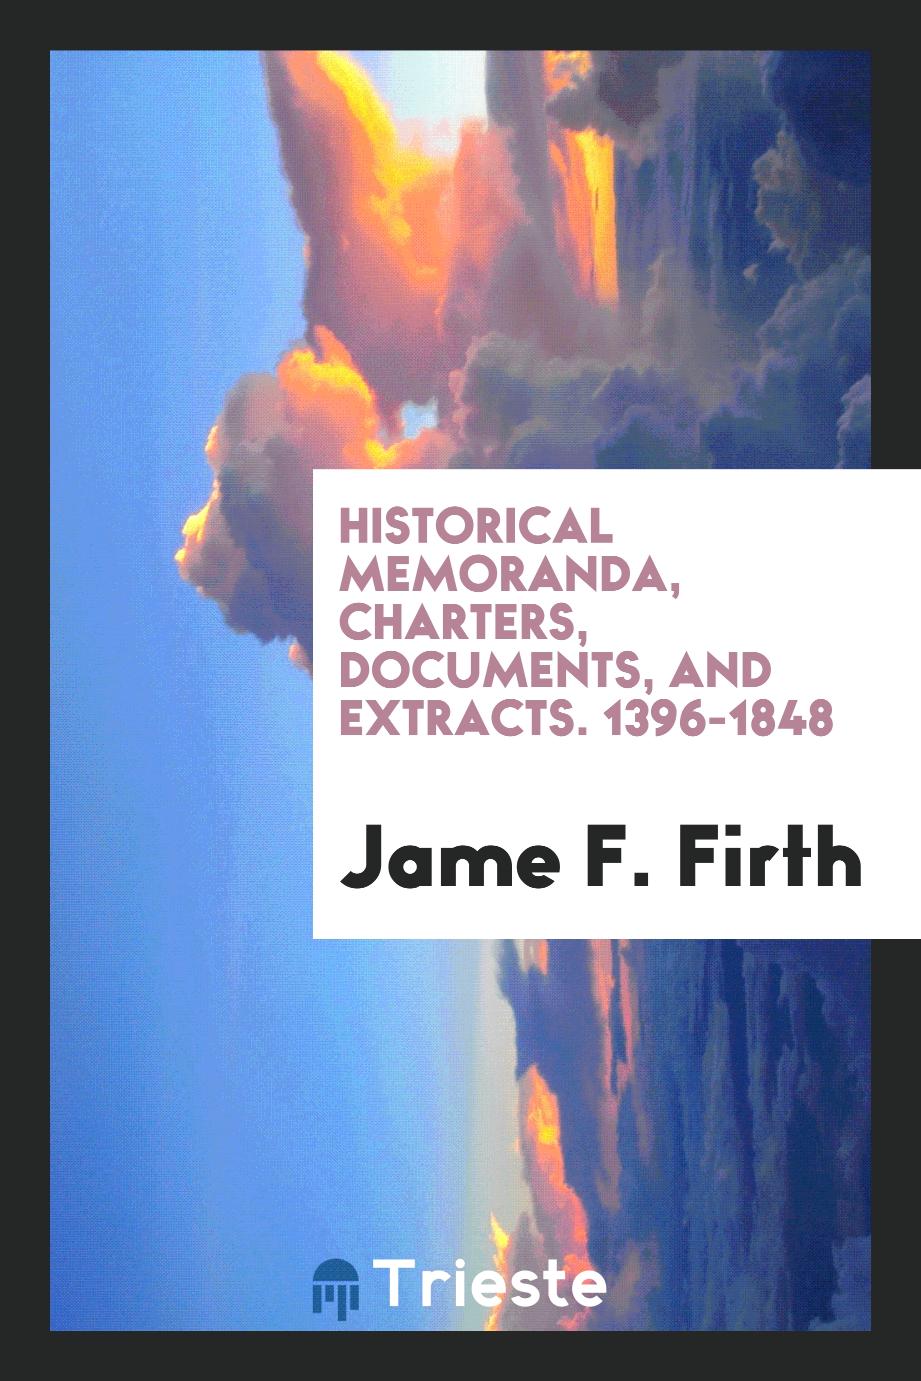 Historical Memoranda, Charters, Documents, and Extracts. 1396-1848